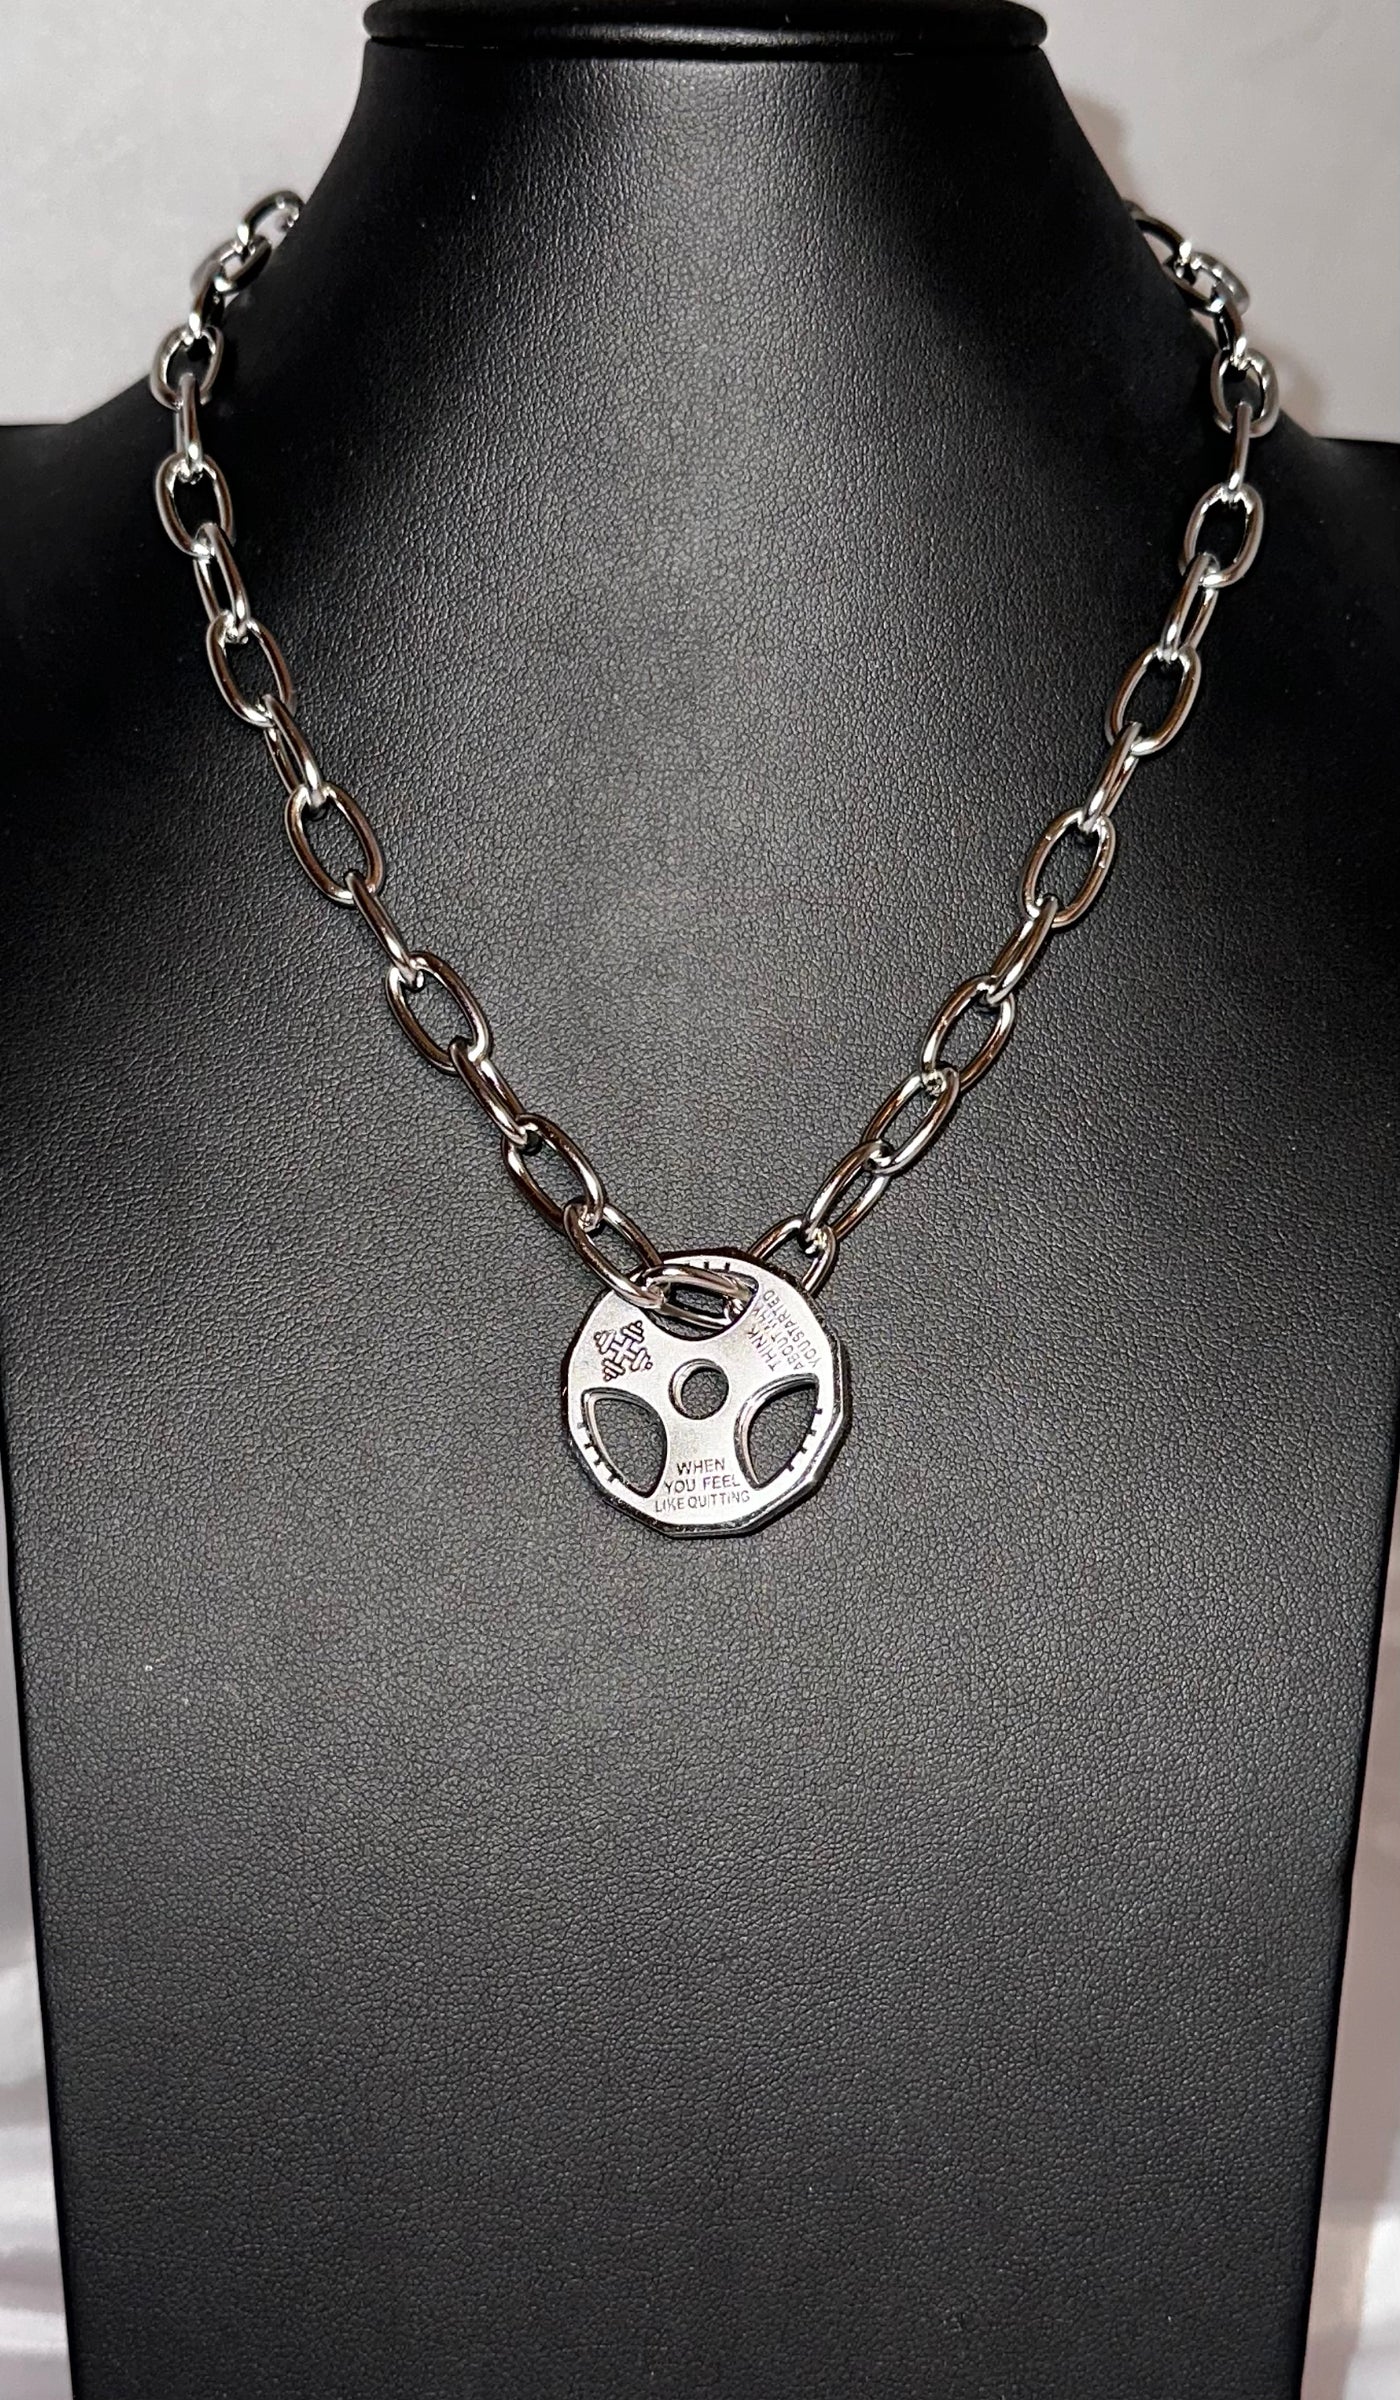 Silver Weight Plate Necklace with Oval Link Chain - Brent's Bling